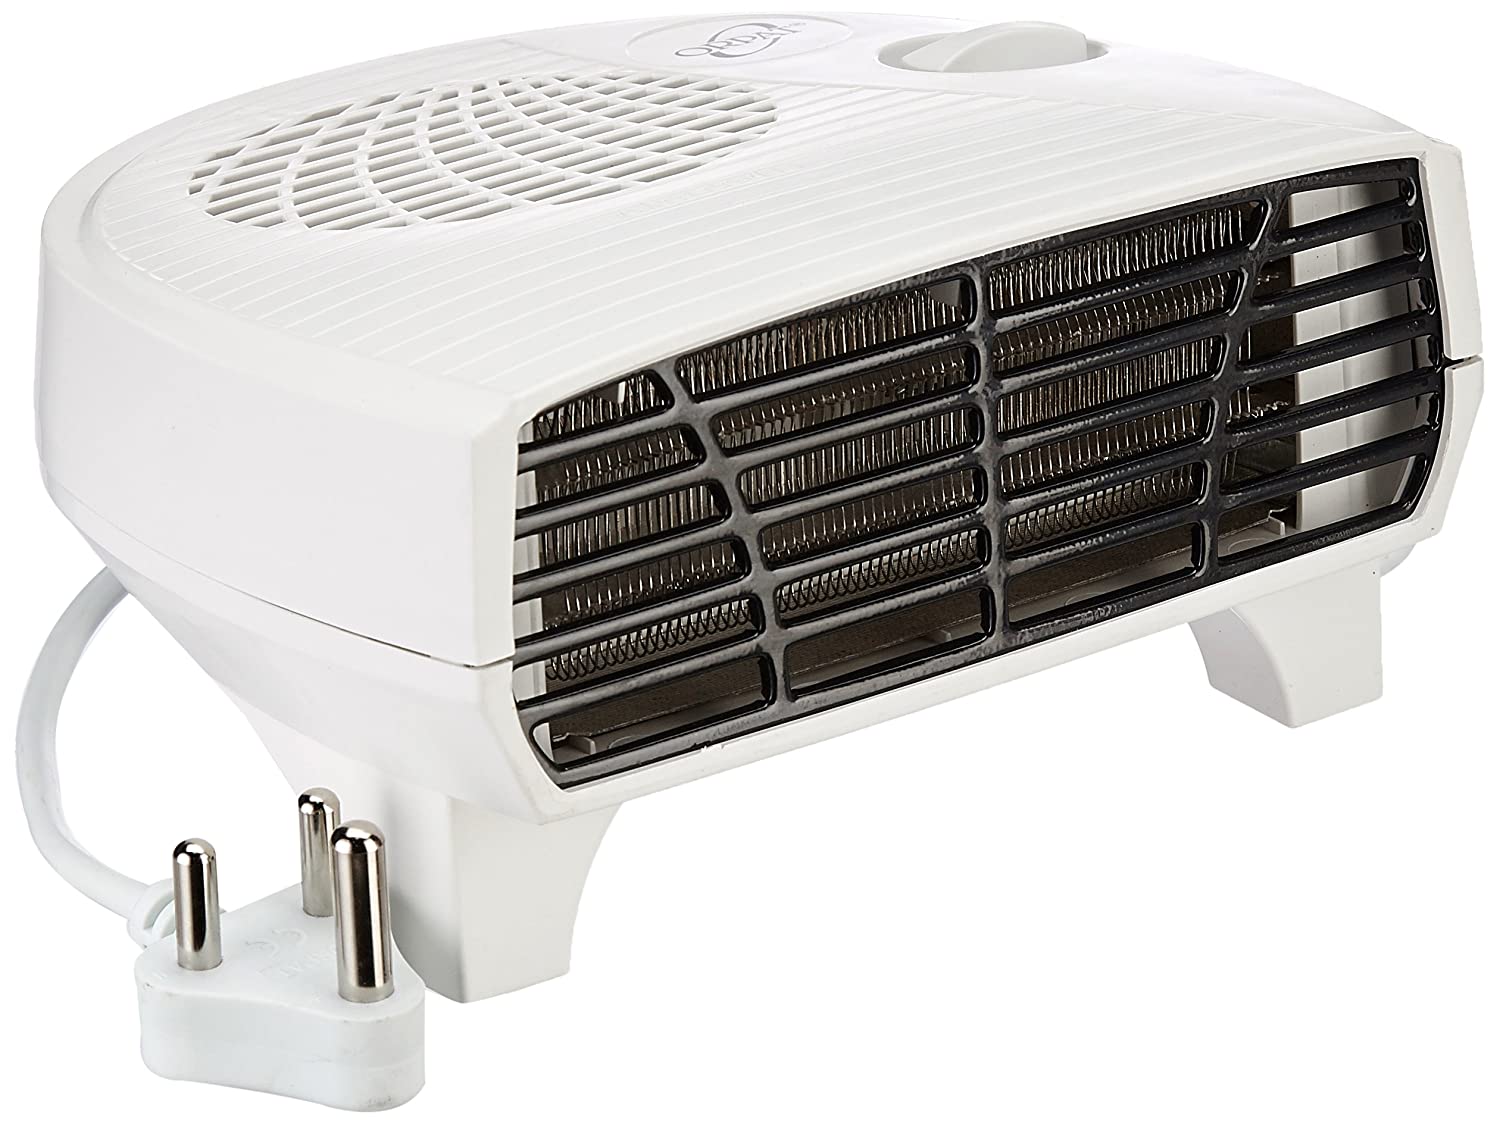 Amazon Deal: Buy safest and best brand of blower heater for home, price starts from only Rs.